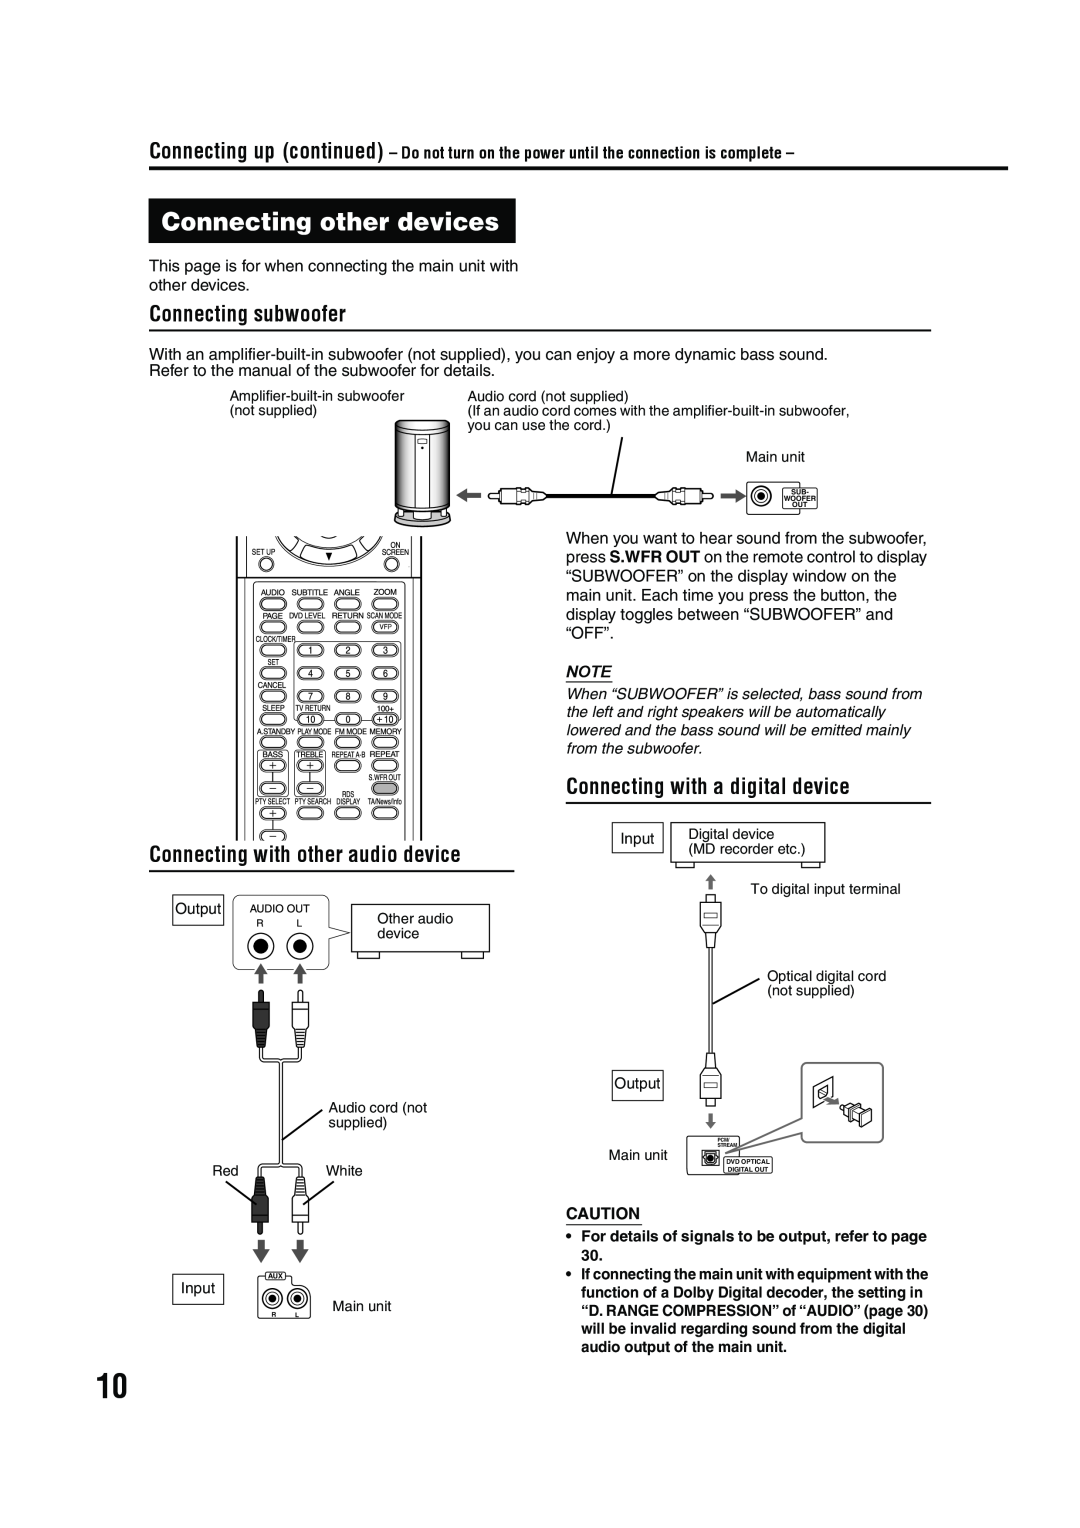 JVC GVT0143-008A manual Connecting other devices, Connecting subwoofer, Connecting with a digital device, Connection 